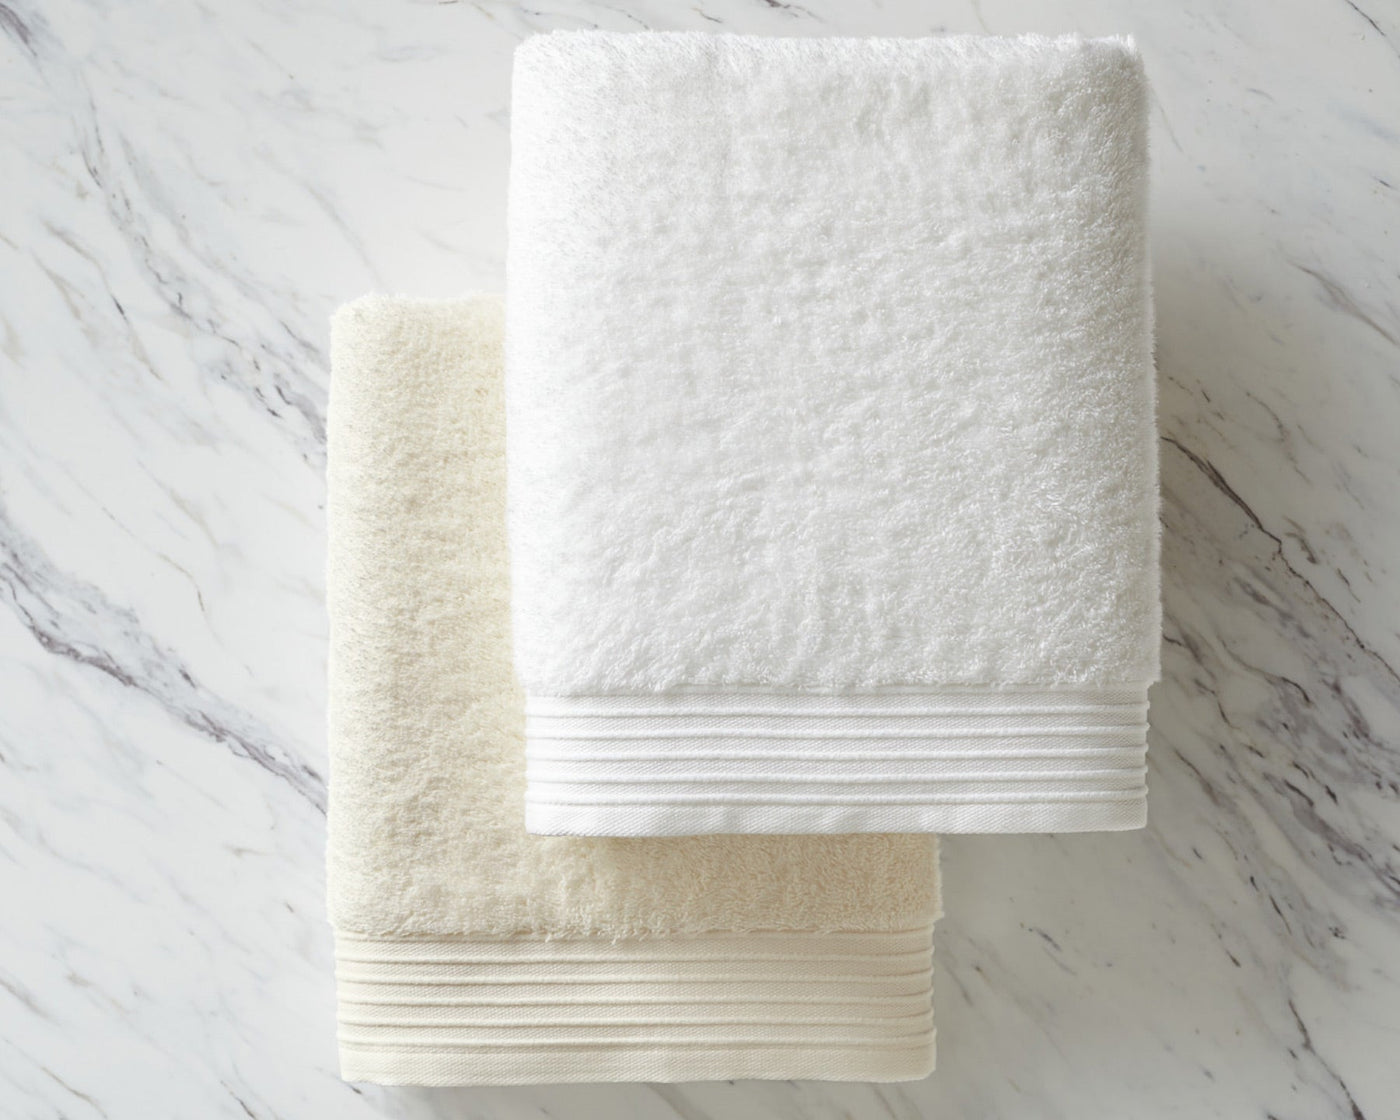 plush and absorbent bamboo towels in white and ivory by Peacock Alley